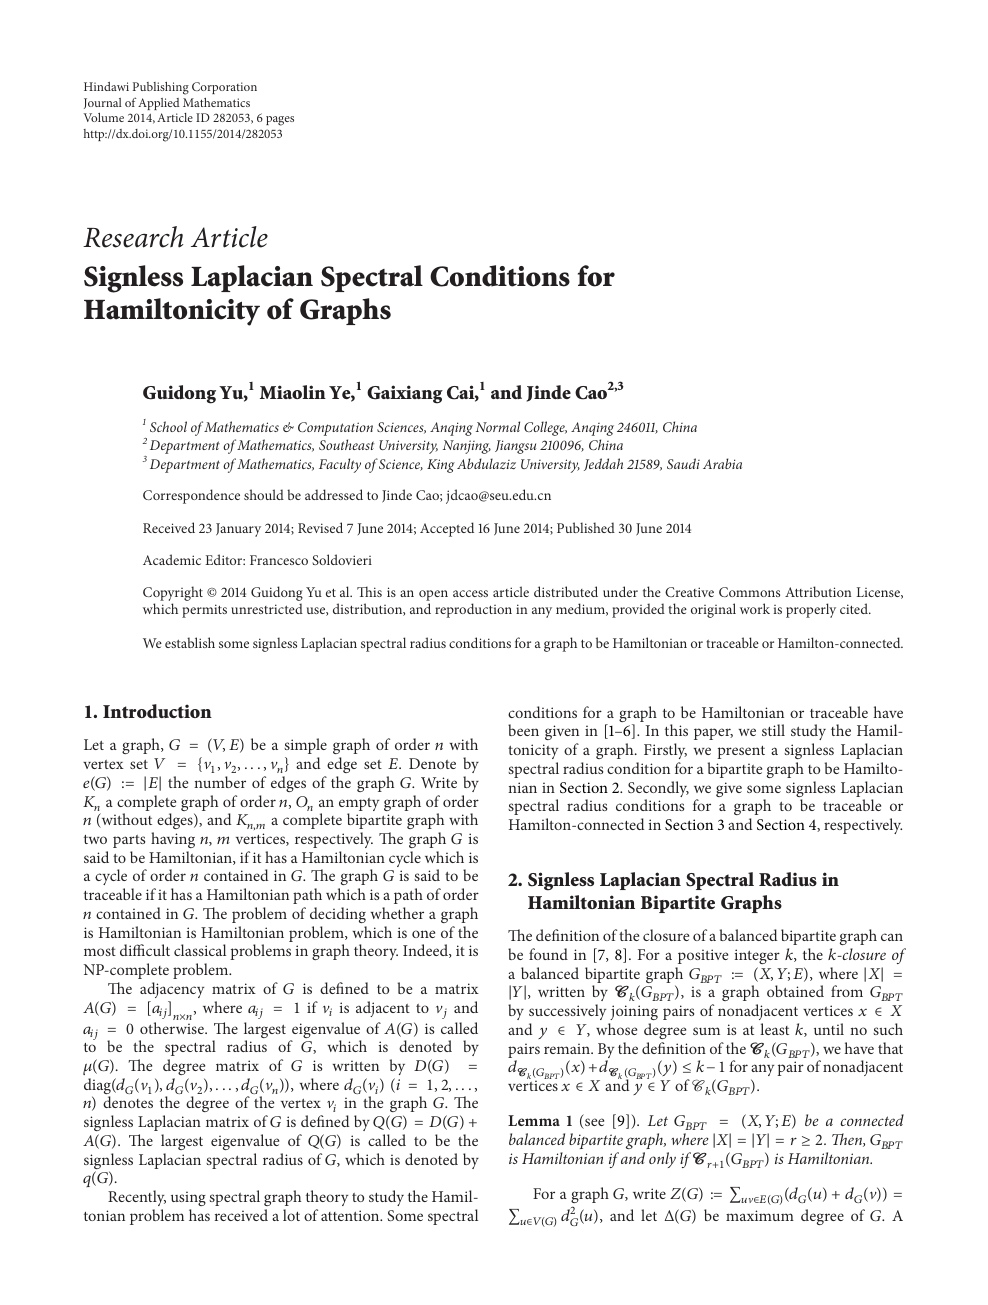 Signless Laplacian Spectral Conditions For Hamiltonicity Of Graphs Topic Of Research Paper In Mathematics Download Scholarly Article Pdf And Read For Free On Cyberleninka Open Science Hub